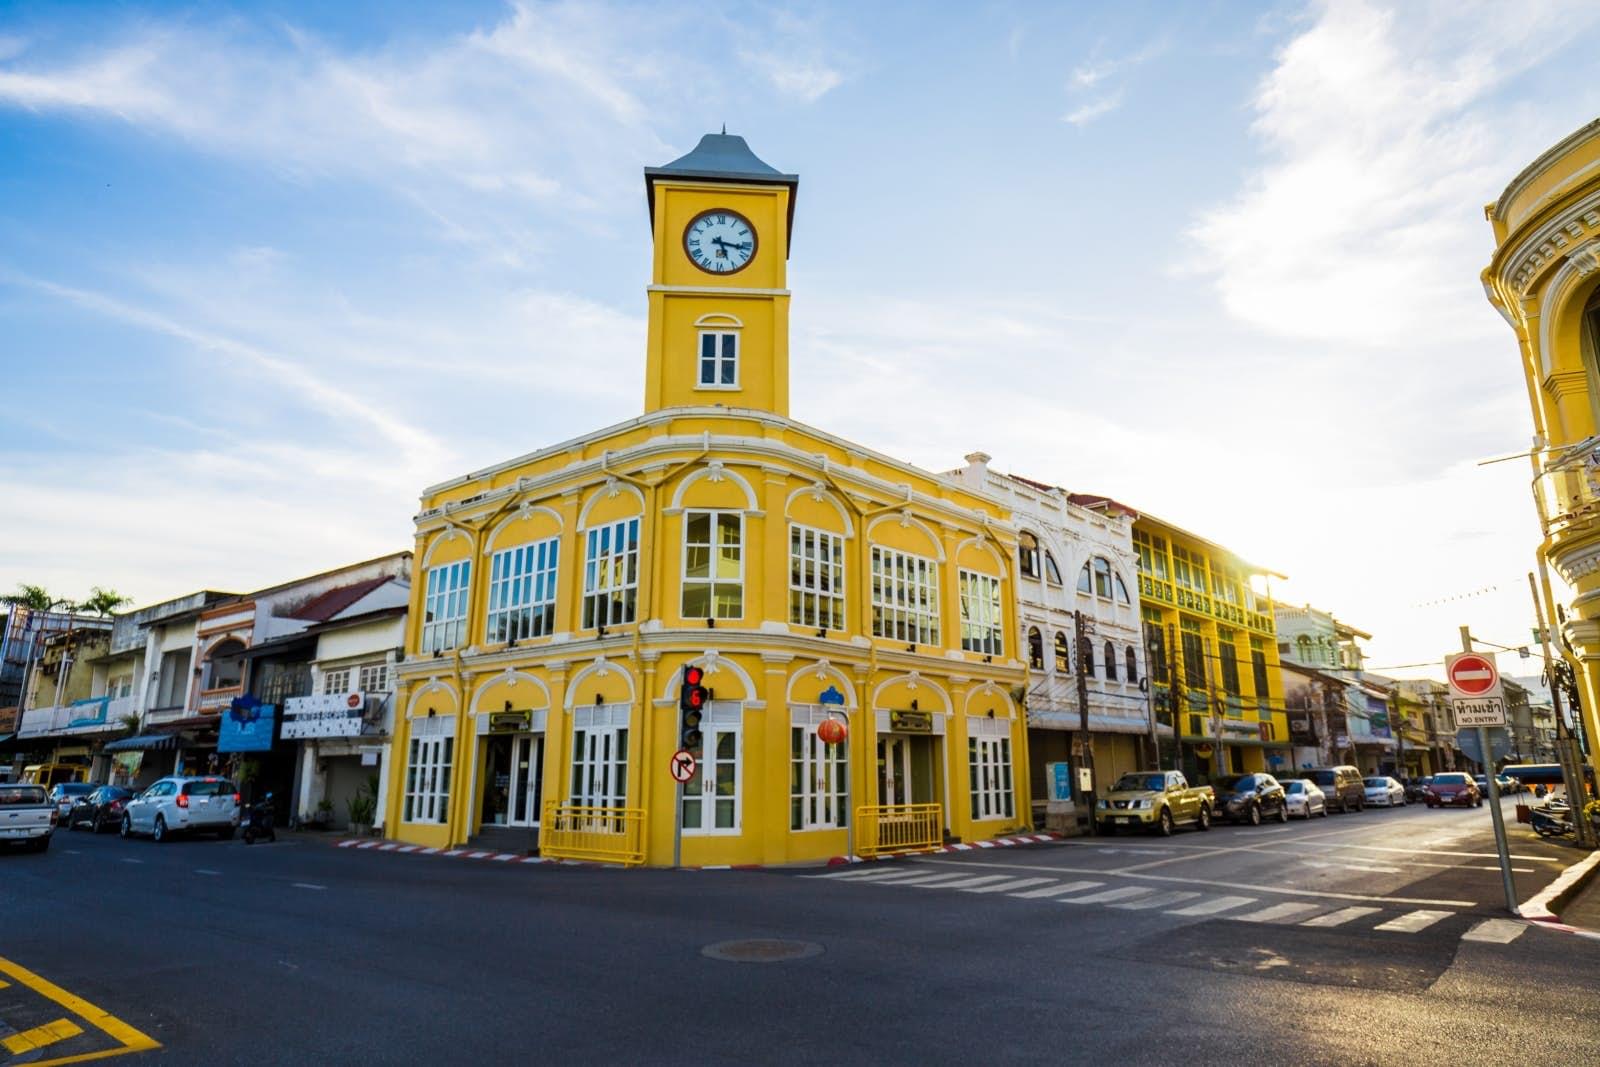 Old Town is the highlight of Phuket.